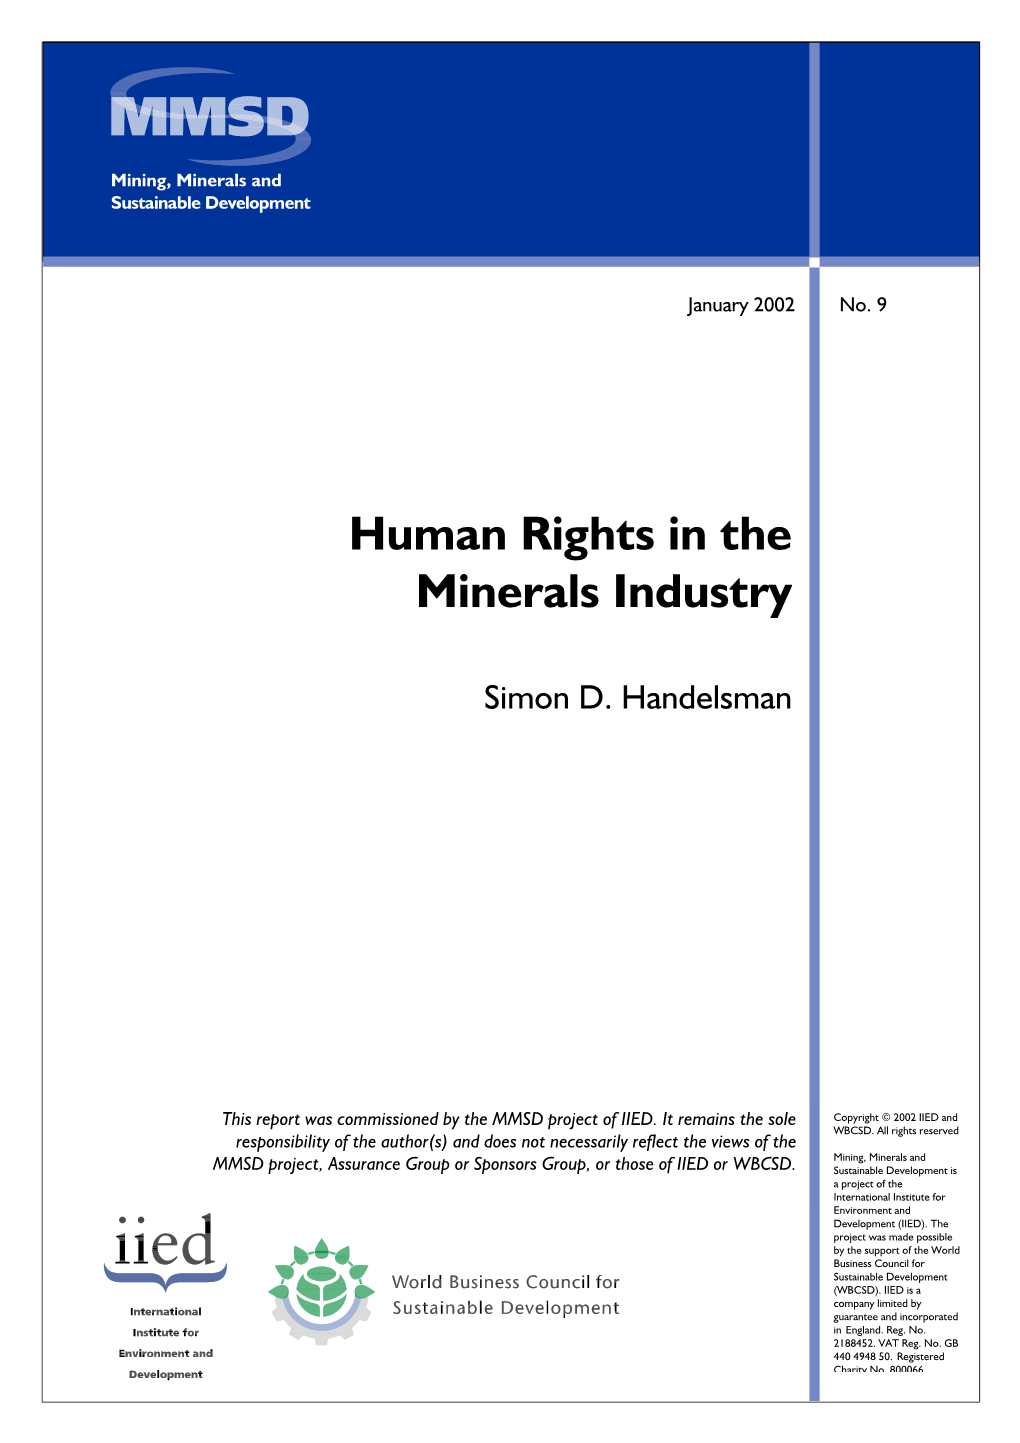 Human Rights in the Minerals Industry